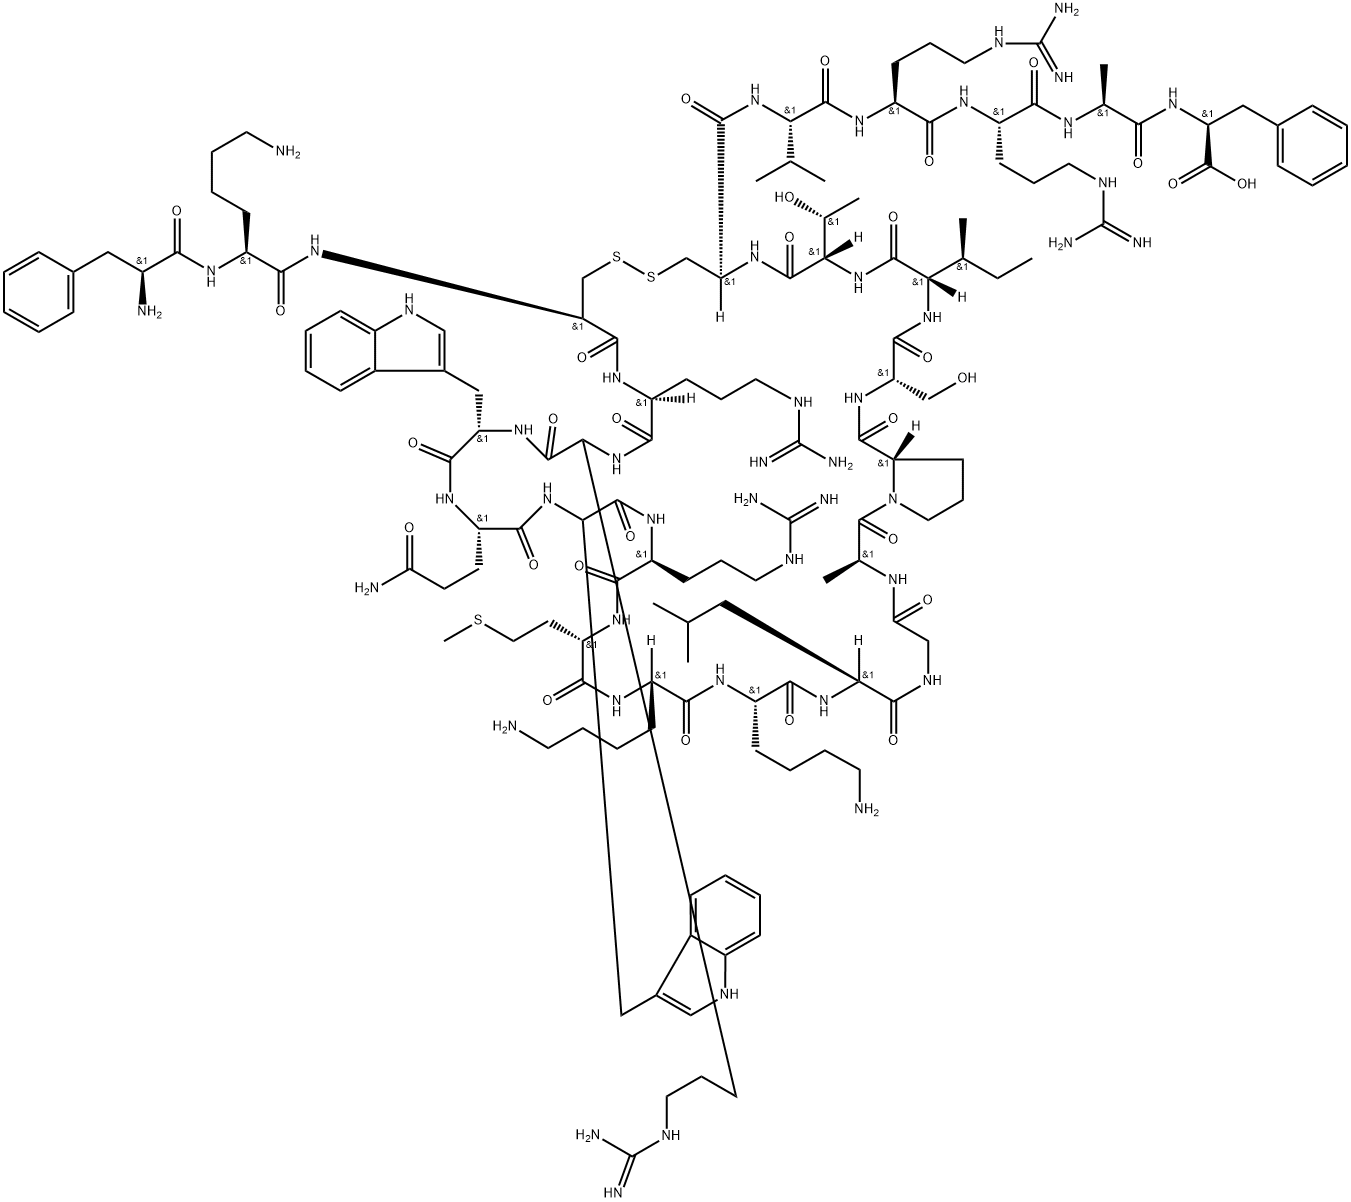 146897-68-9 LactoferrinMolecular Structure and PropertiesMechanism of ActionApplicationsSide Effects